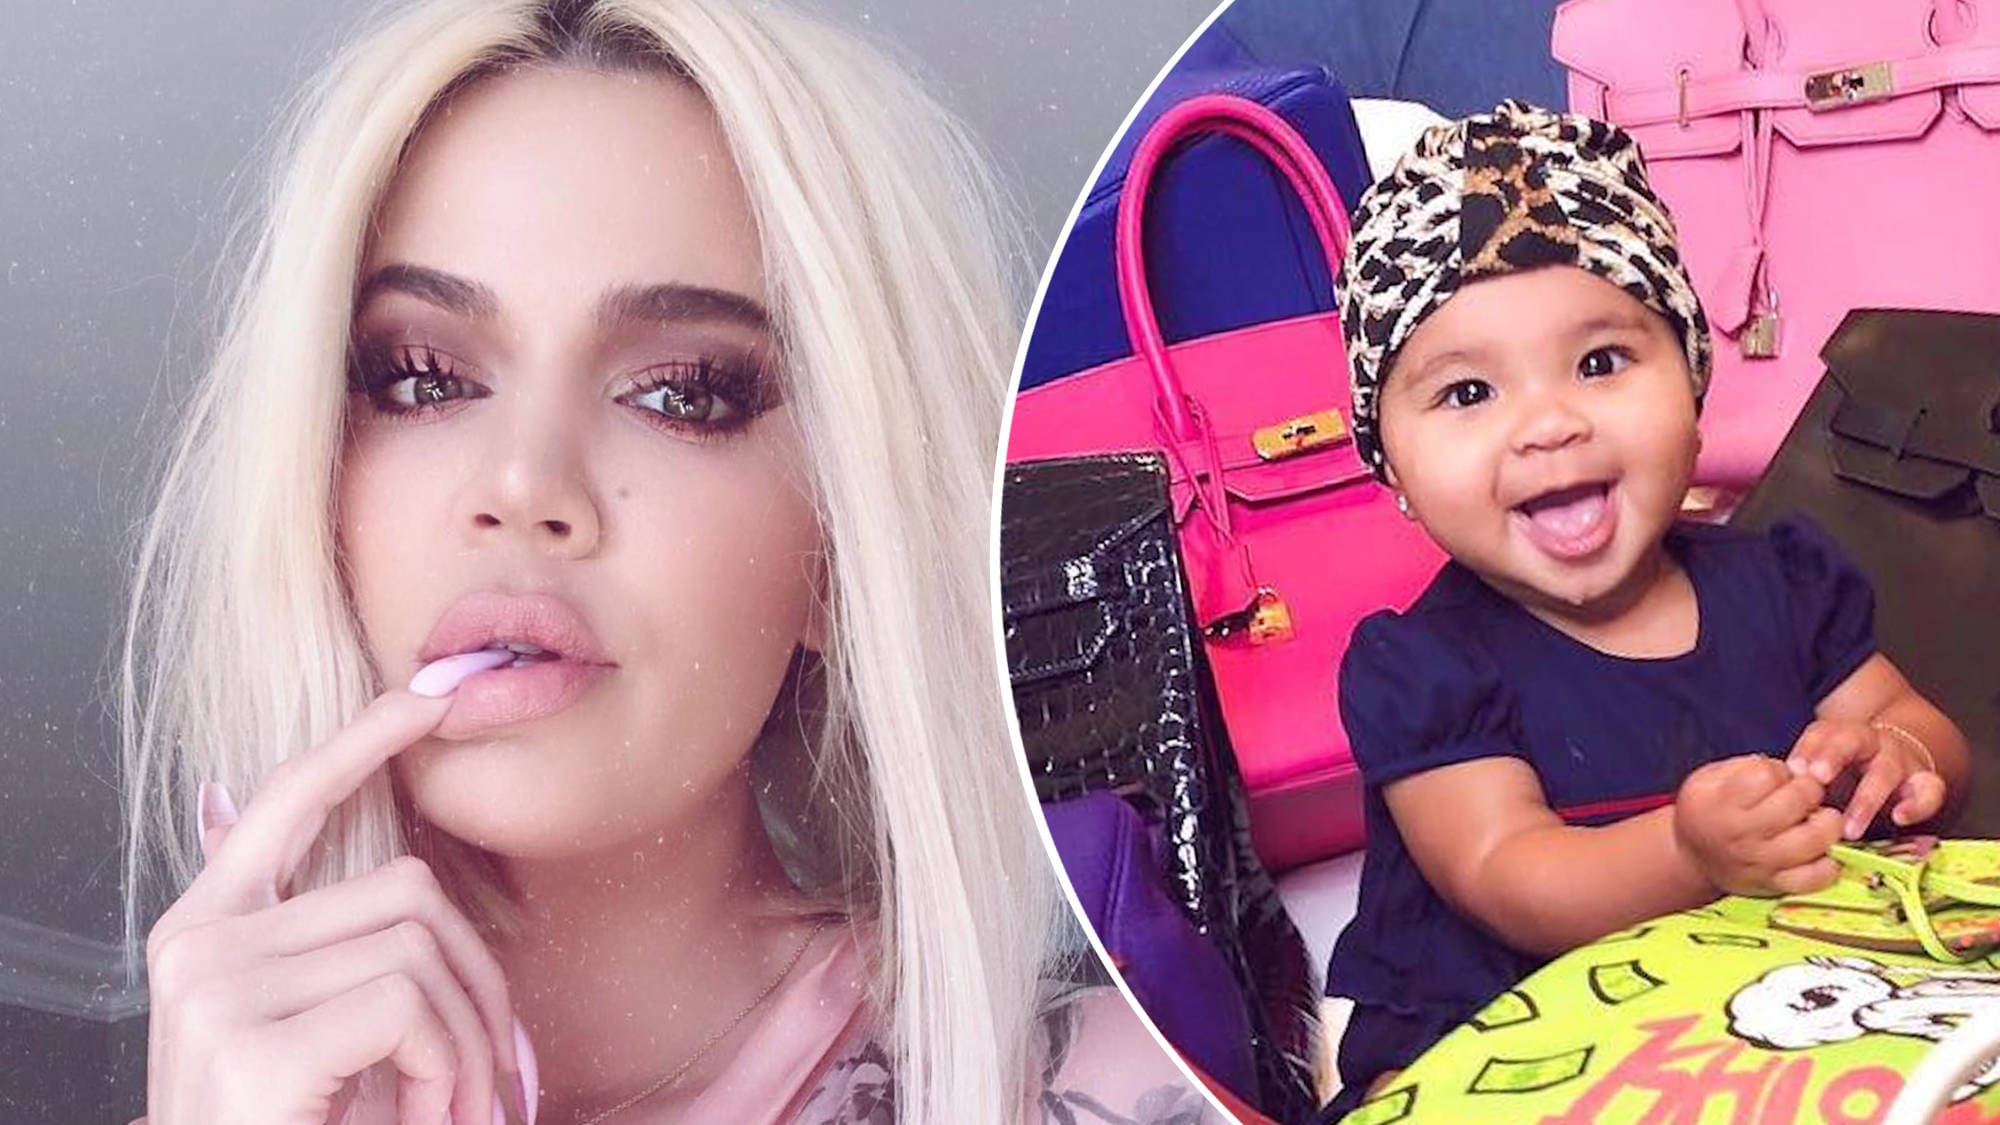 Khloe Kardashian Shows Off Her Beach Body In A Photo With Her Daughter, True Thompson And Fans Criticize Her Pose